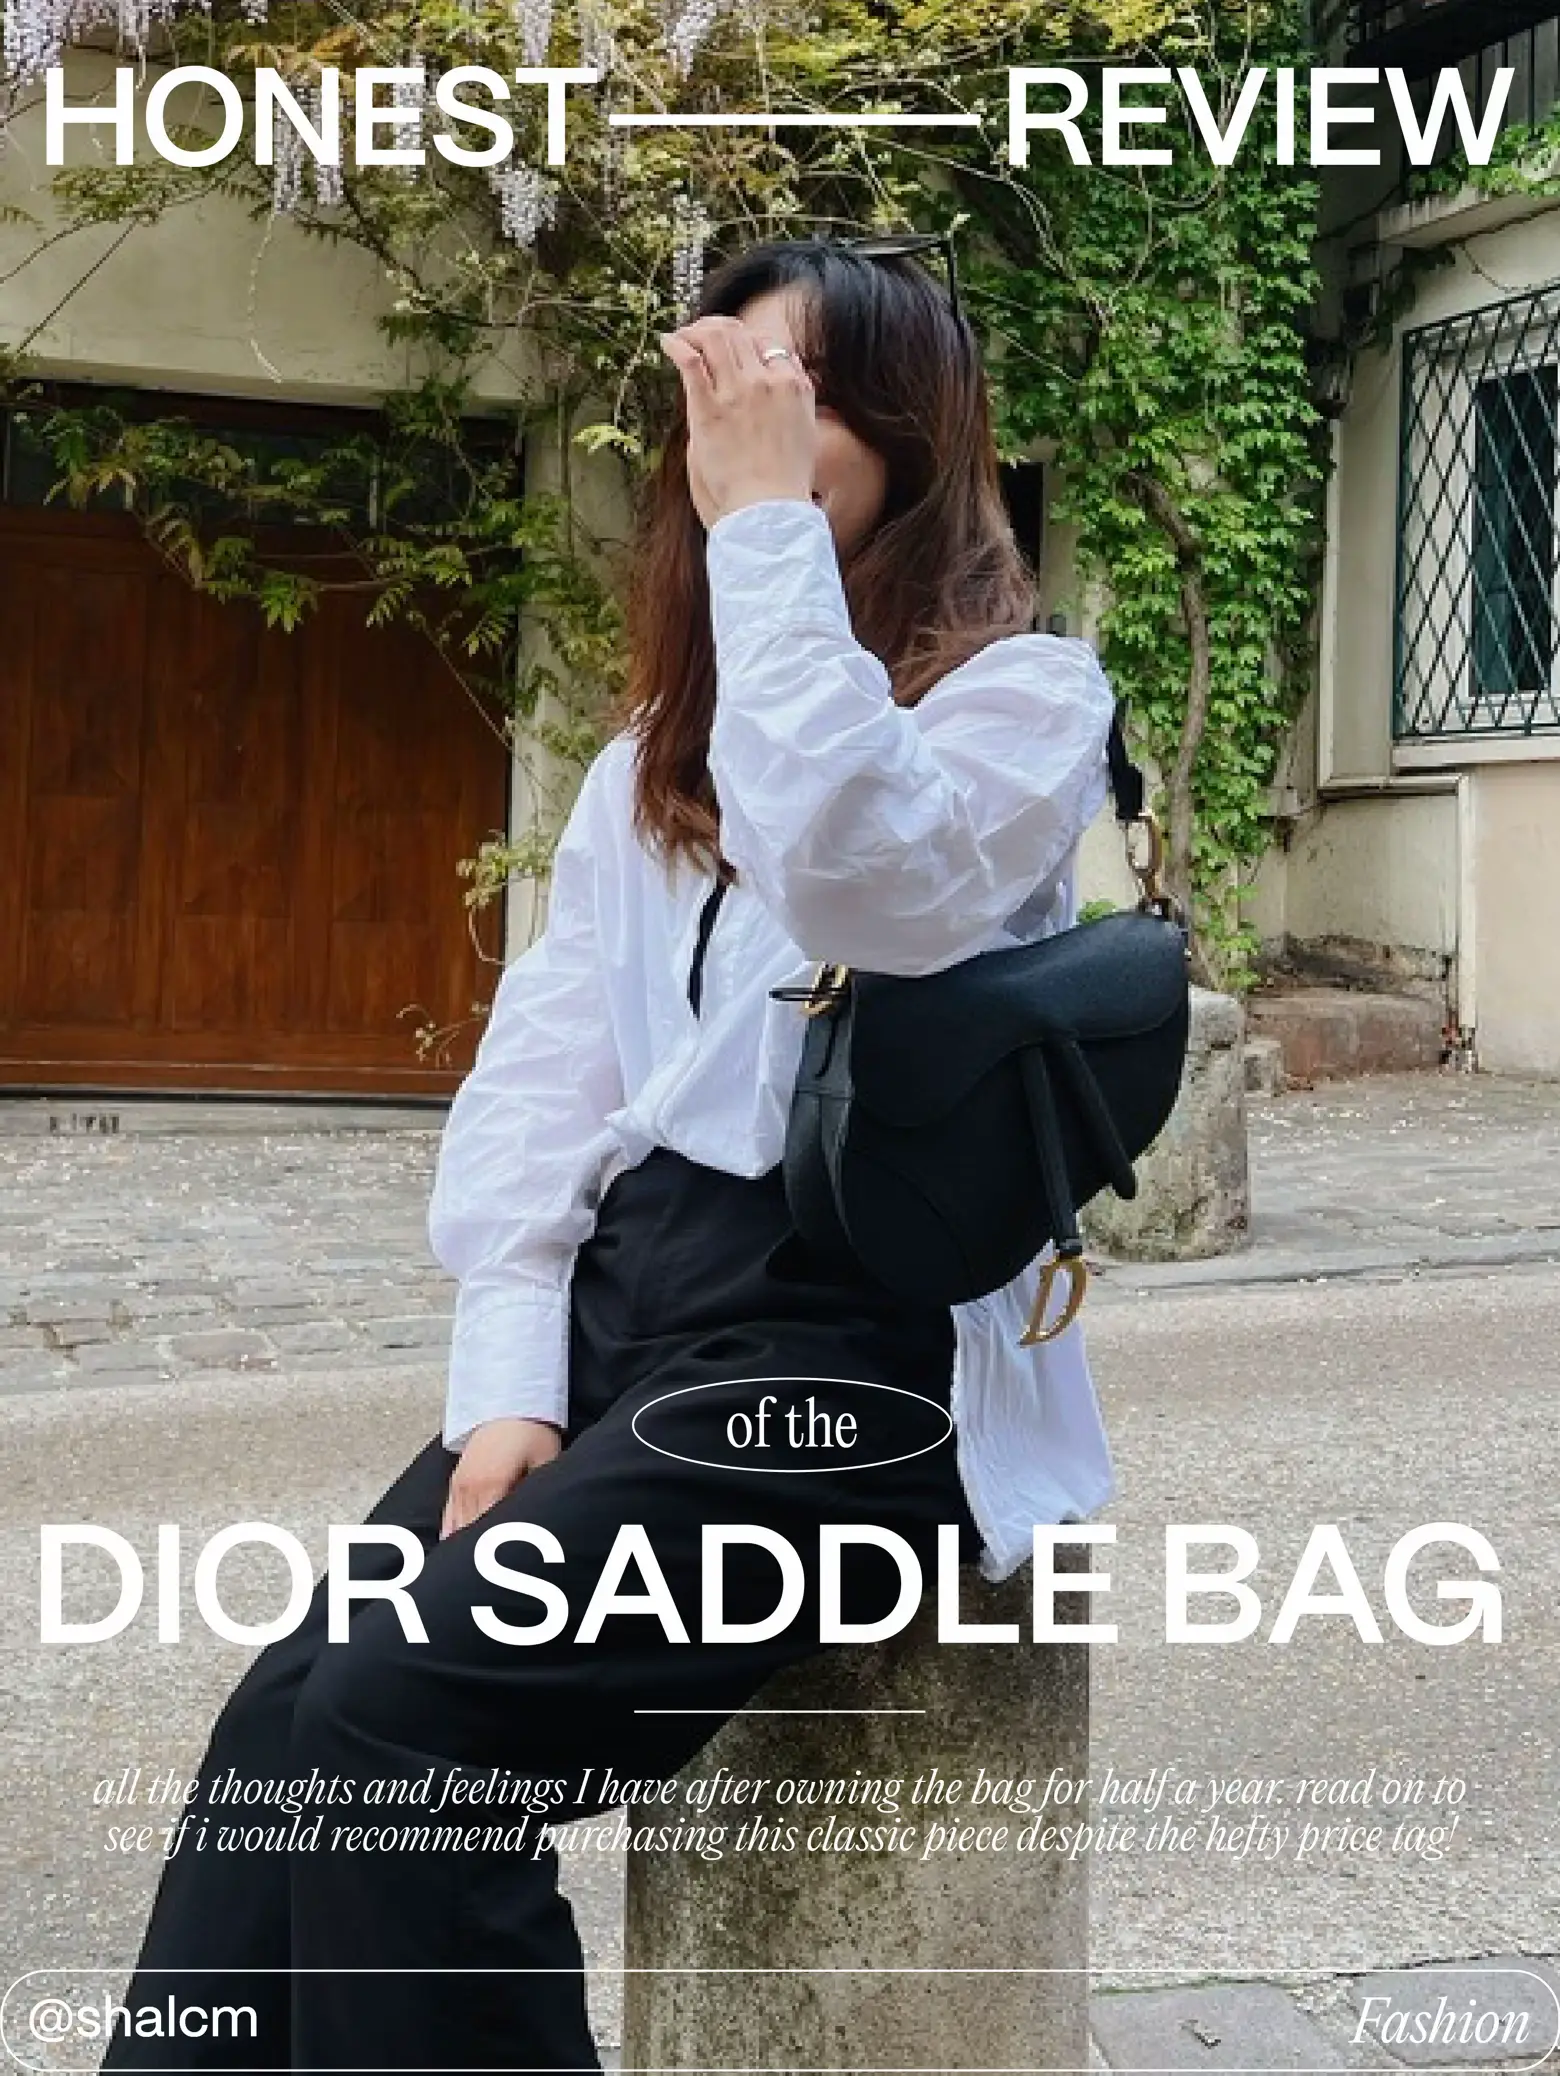 DIOR SADDLE BAG, 2 year Honest Review, Pros & Cons